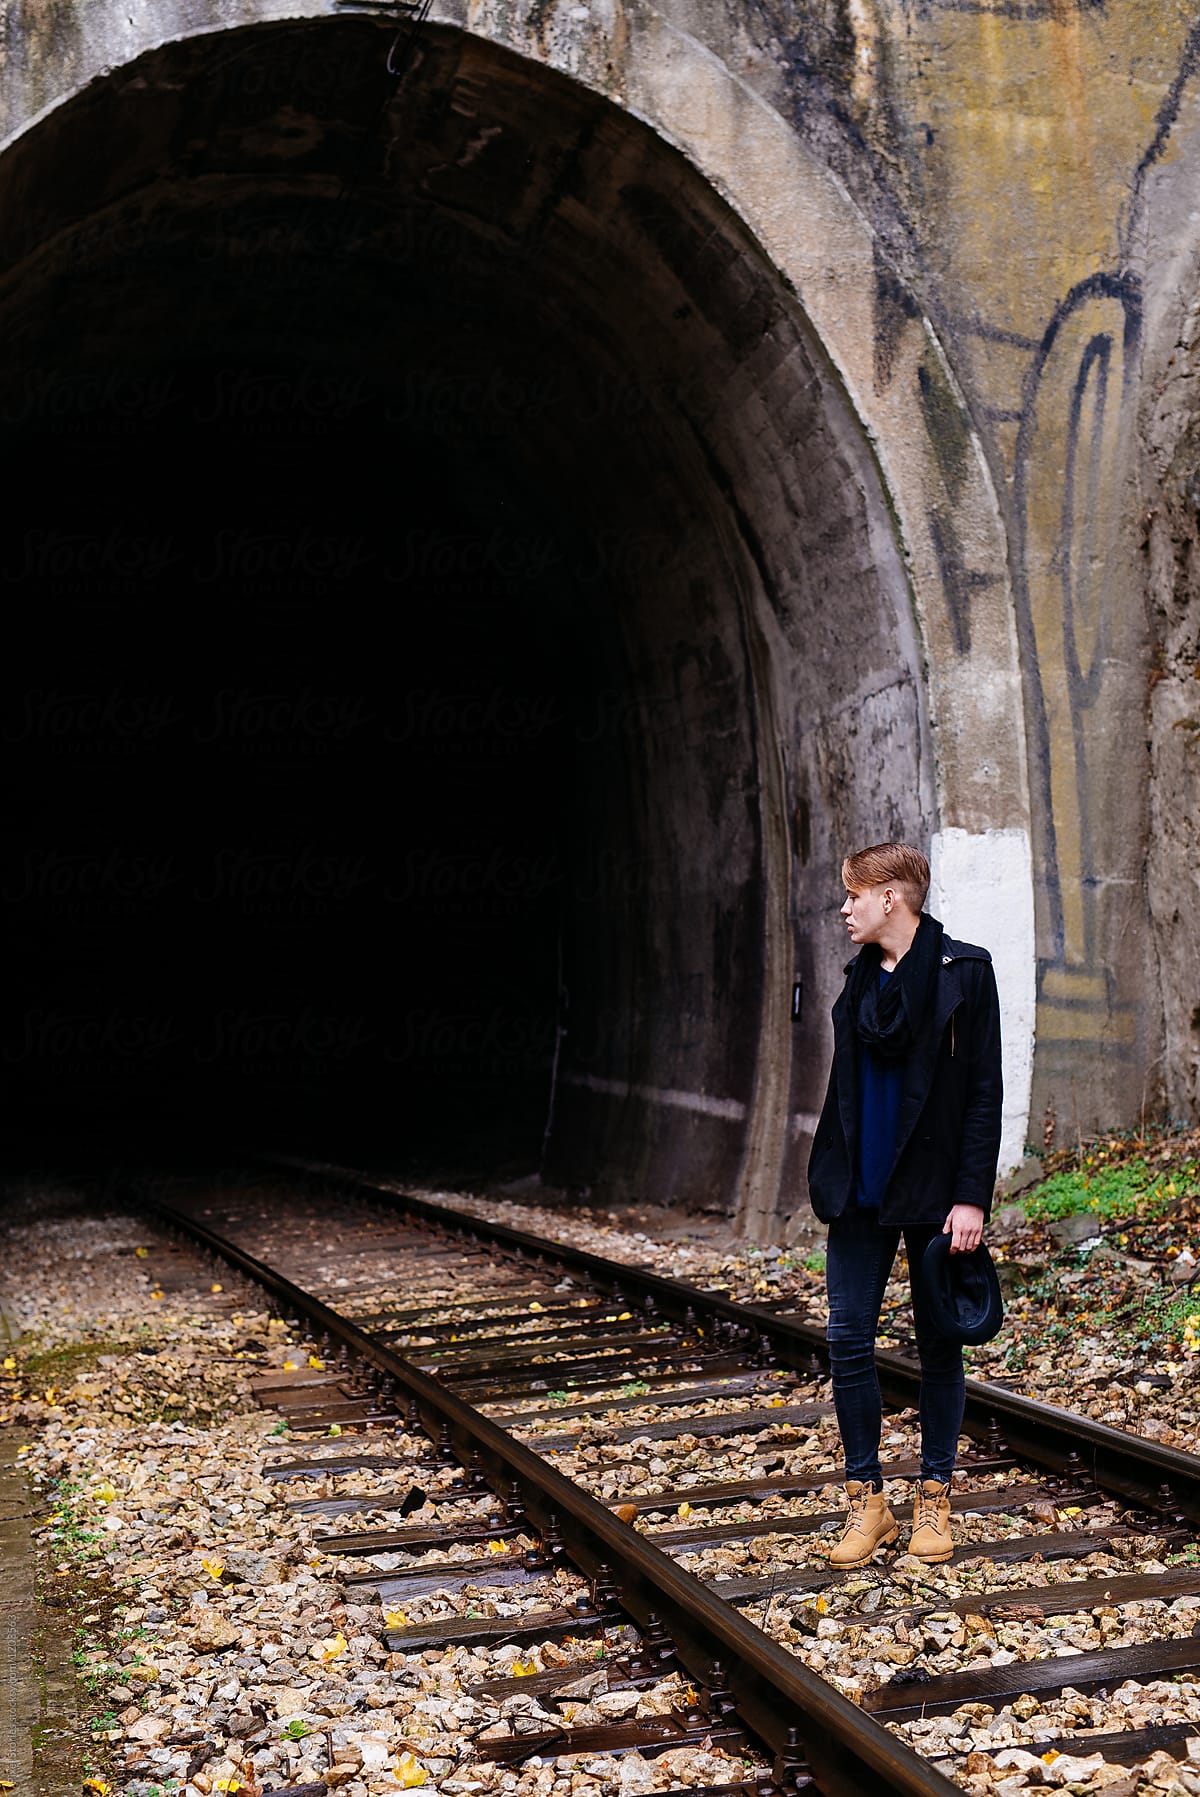 Handsome young man posing on train tracks